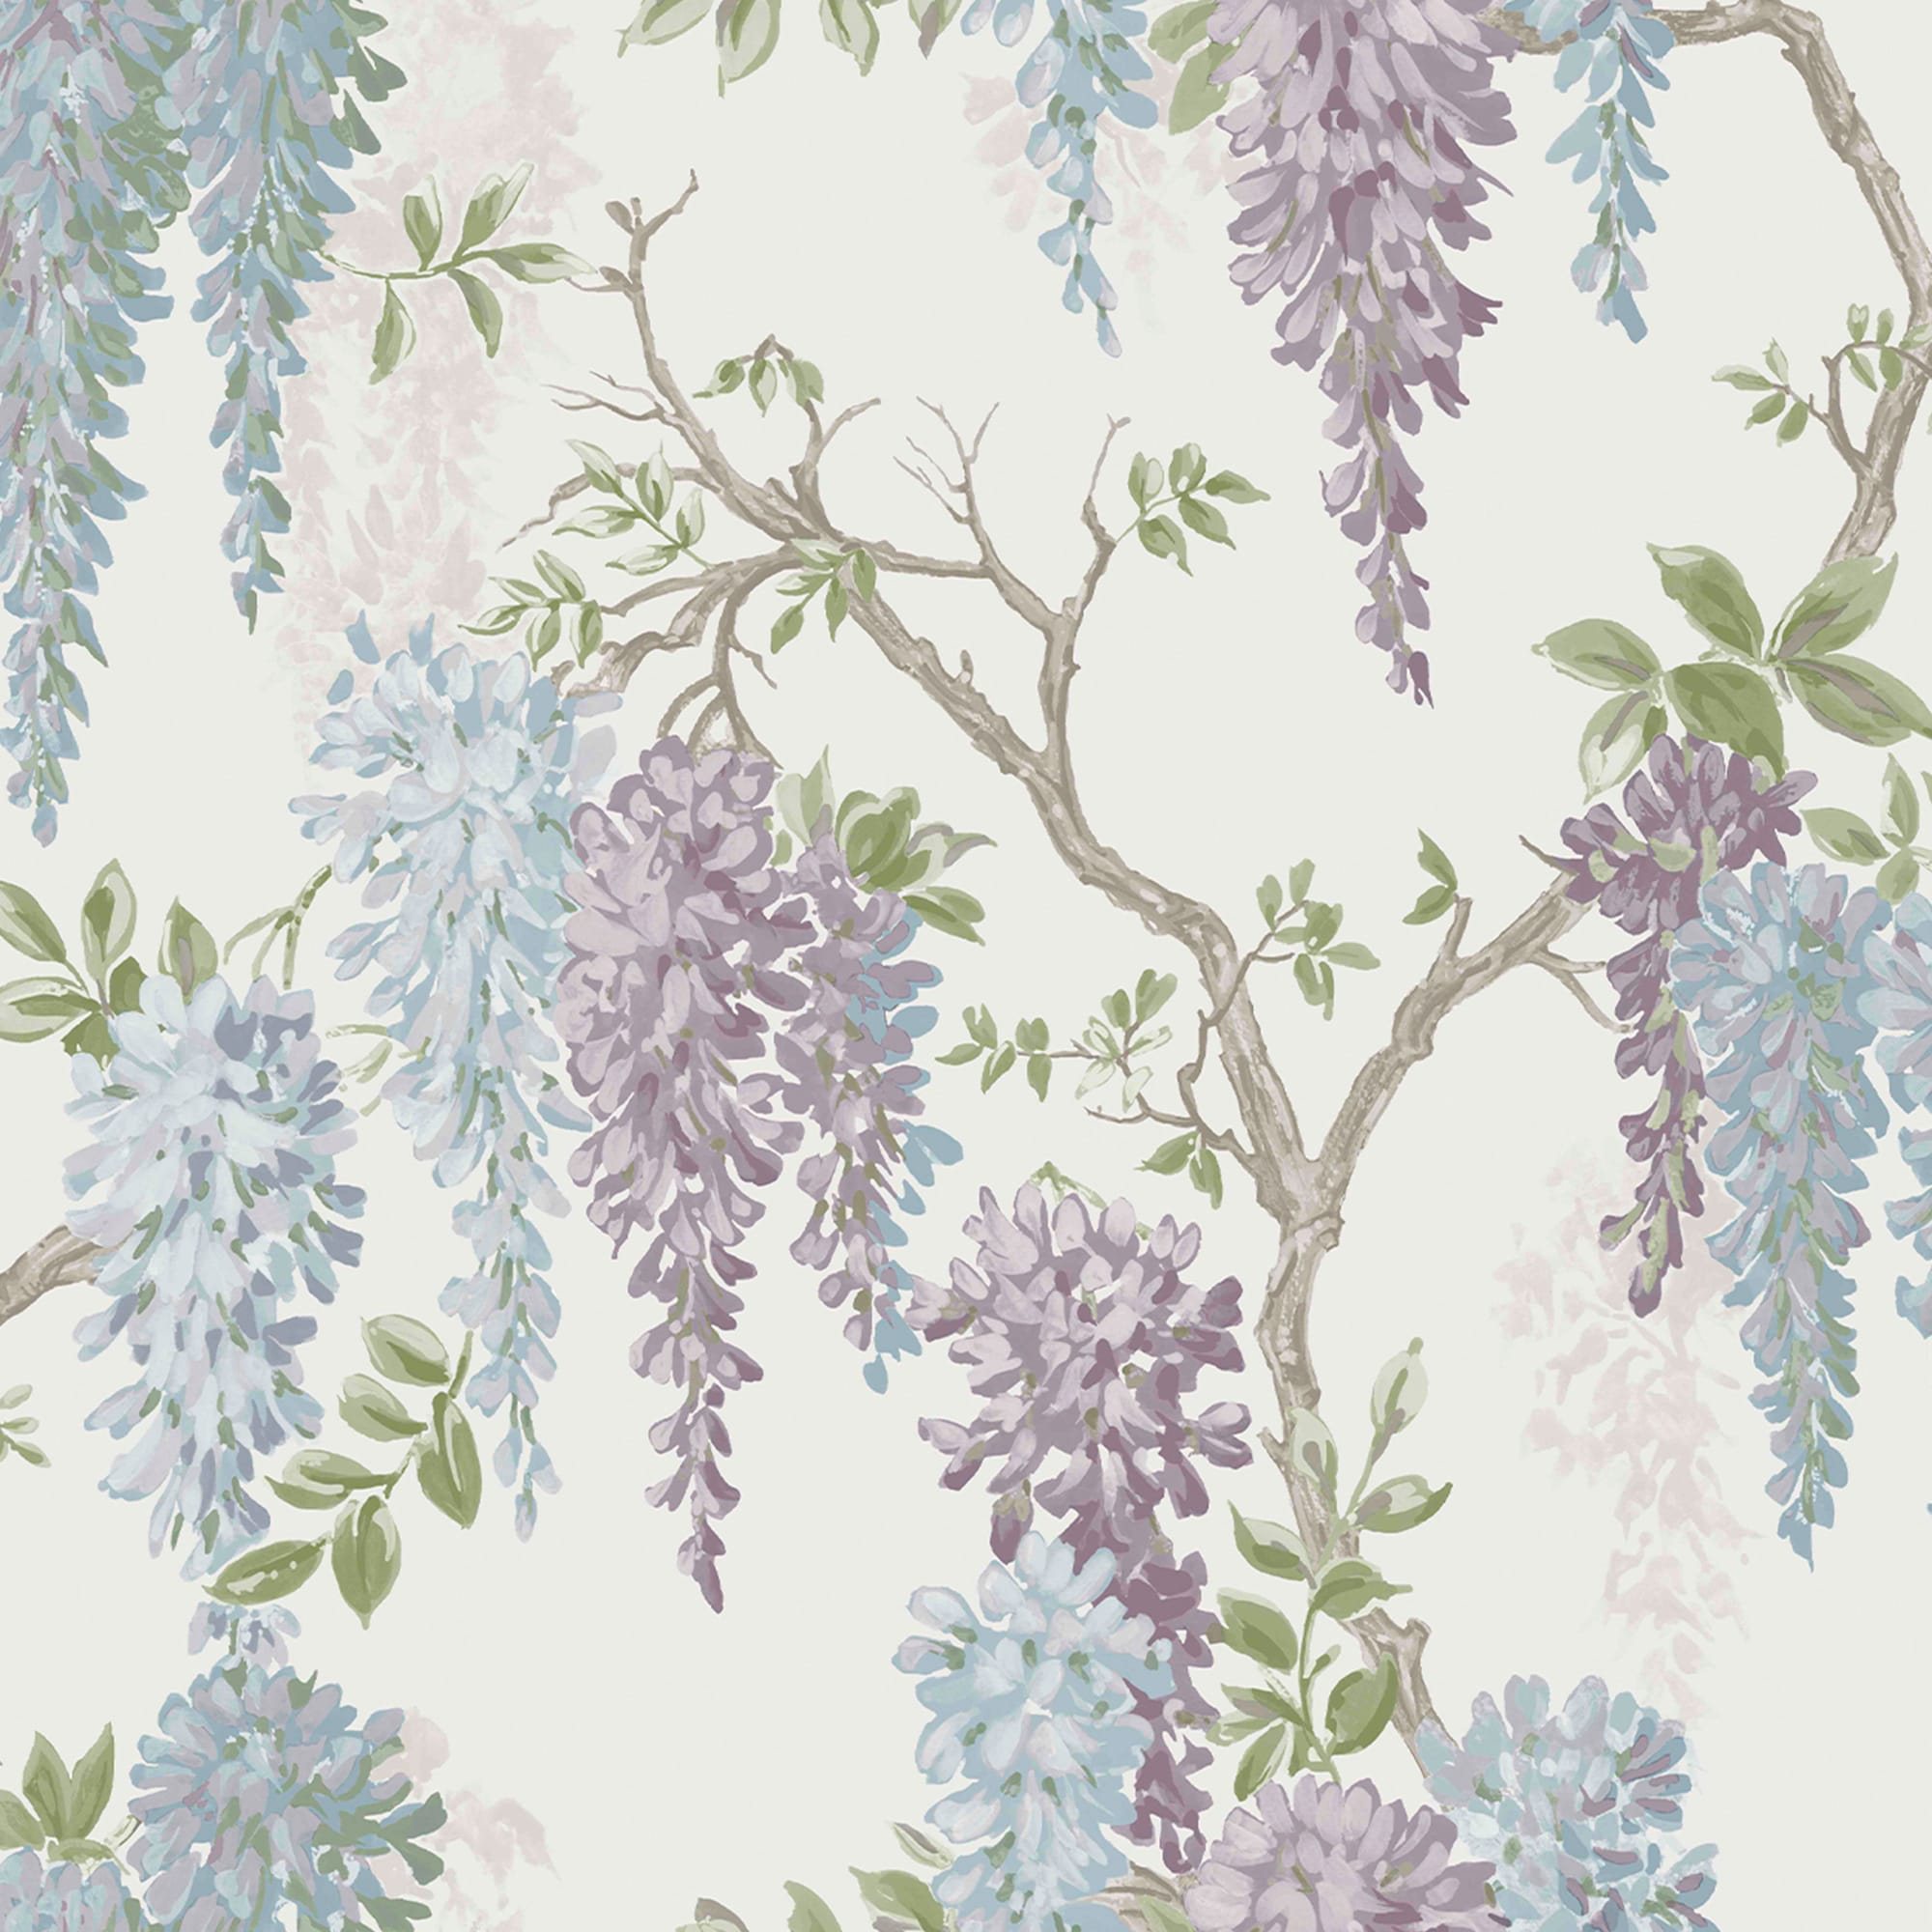 2000x2000 Laura Ashley Laura Ashley Wisteria Garden Pale Iris Wallpaper Sample in the Wallpaper Samples department at